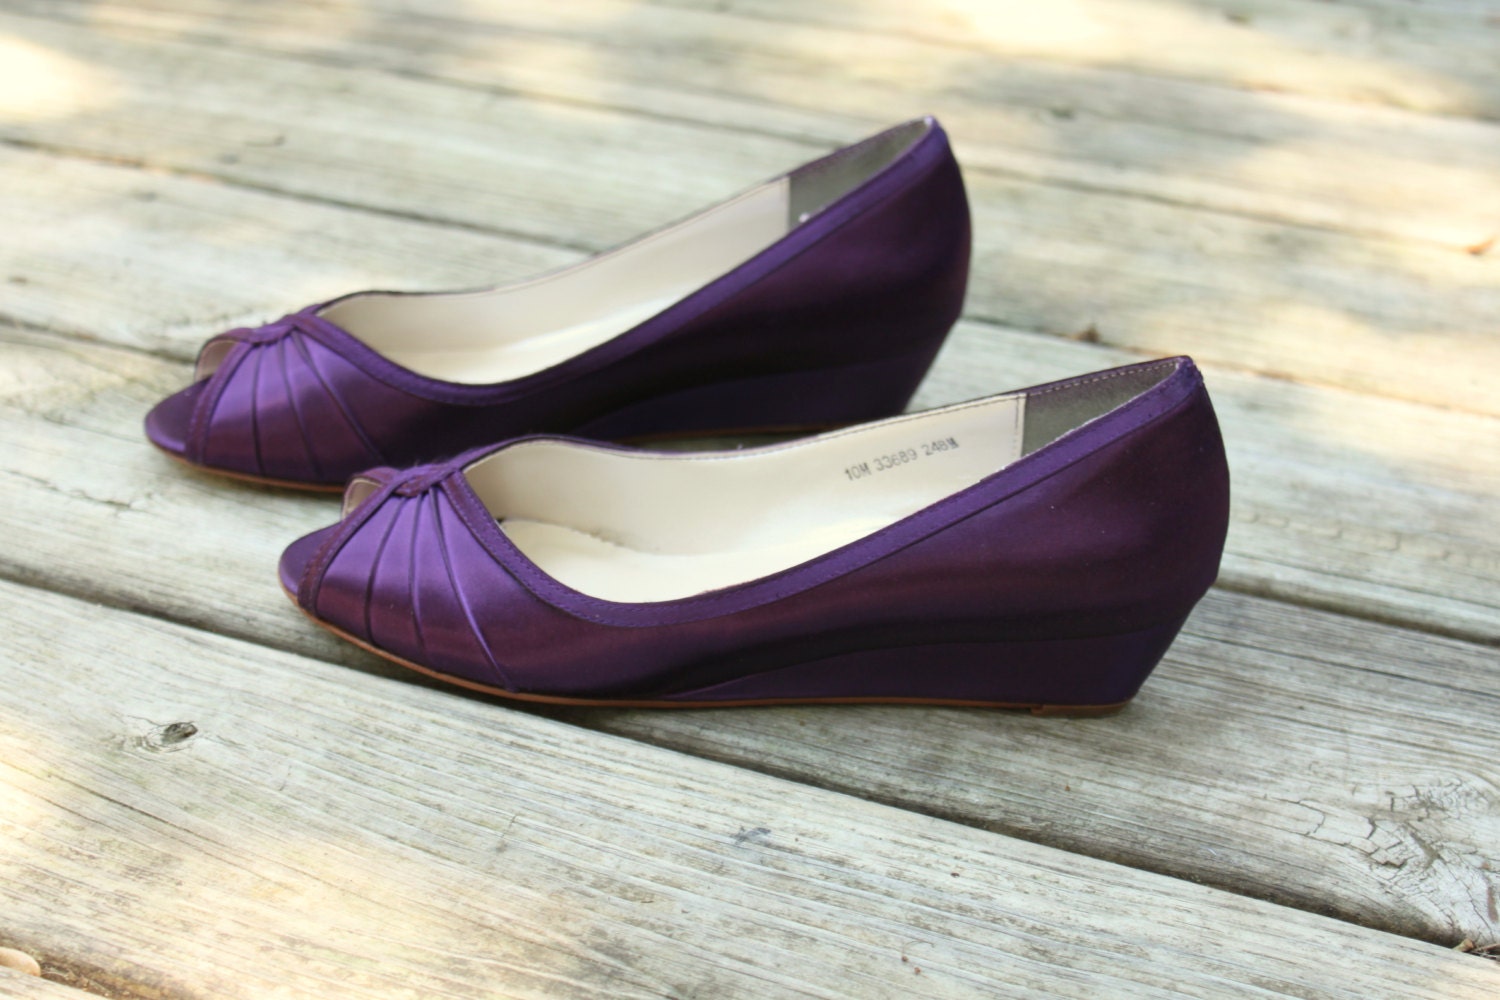 Purple Wedding Shoes Wedge Low heel 1 inch by TheCrystalSlipper